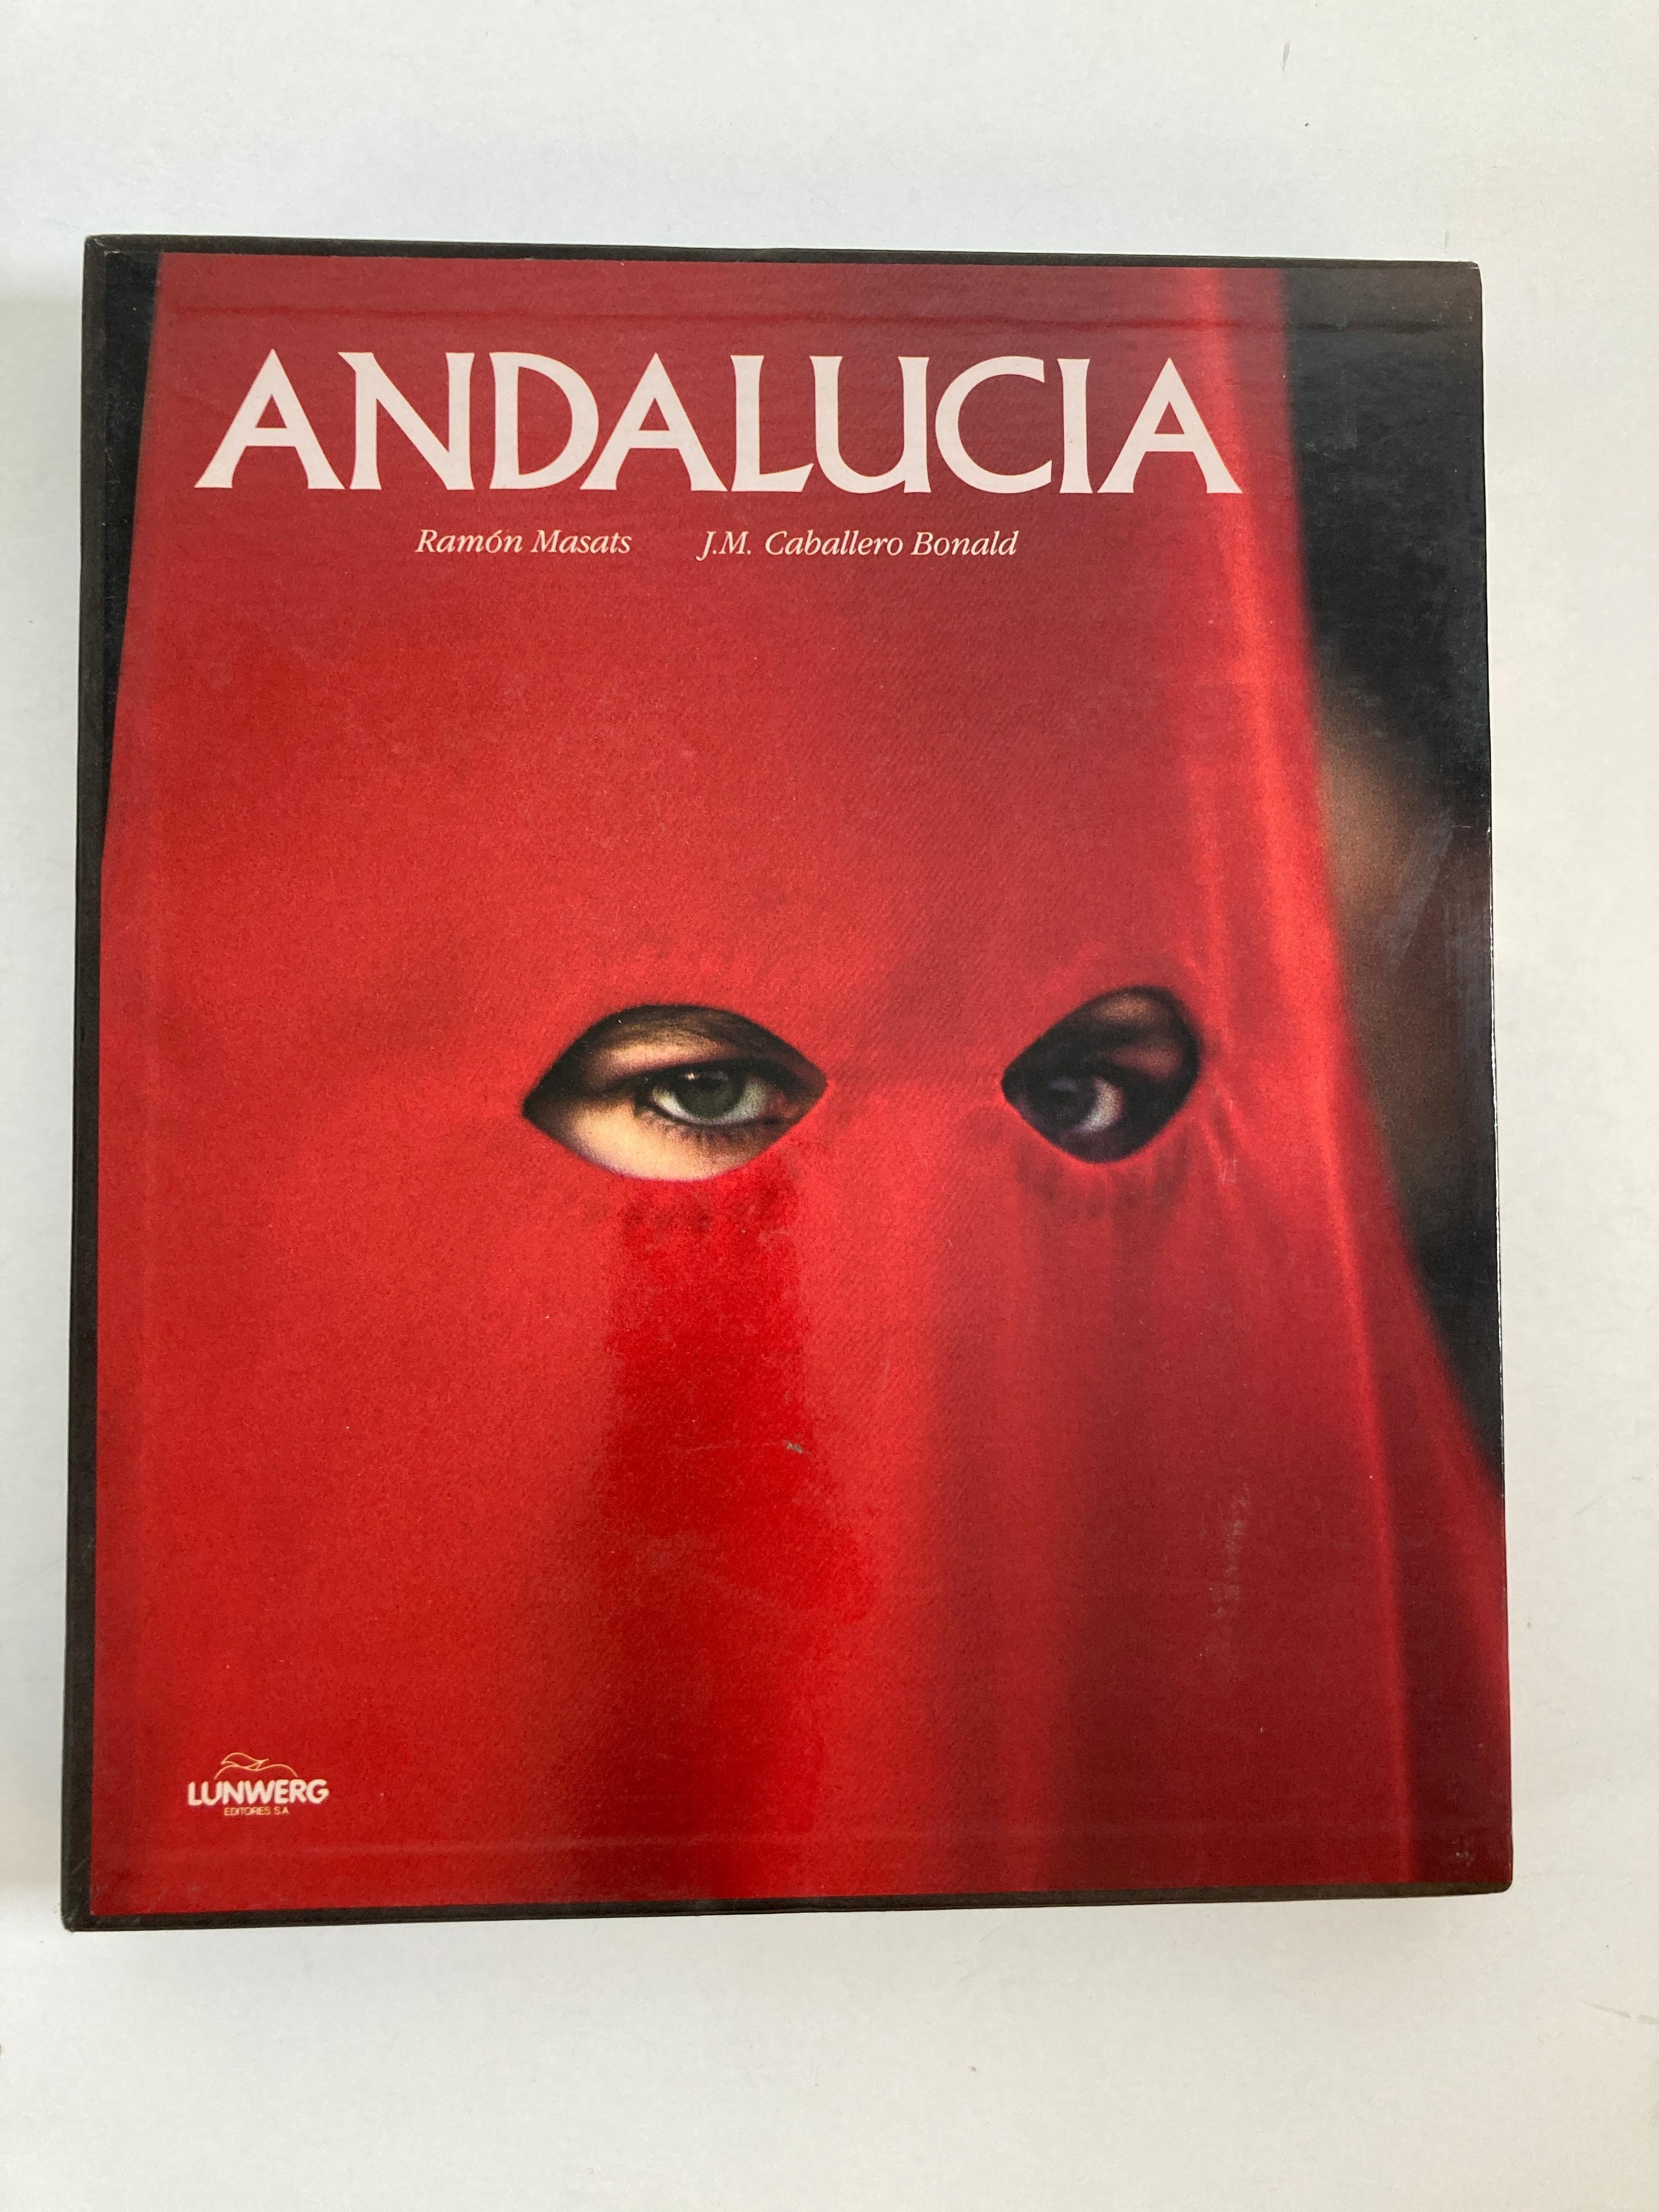 Andalucia book by José Manuel Caballero and Ramón Masats Hardcover Book.
Andalucia, is a magnificent book composed of the photographs of Ramón Masats and the texts of the Jerez-born writer and National Prize for Literature and Poetry, José Manuel